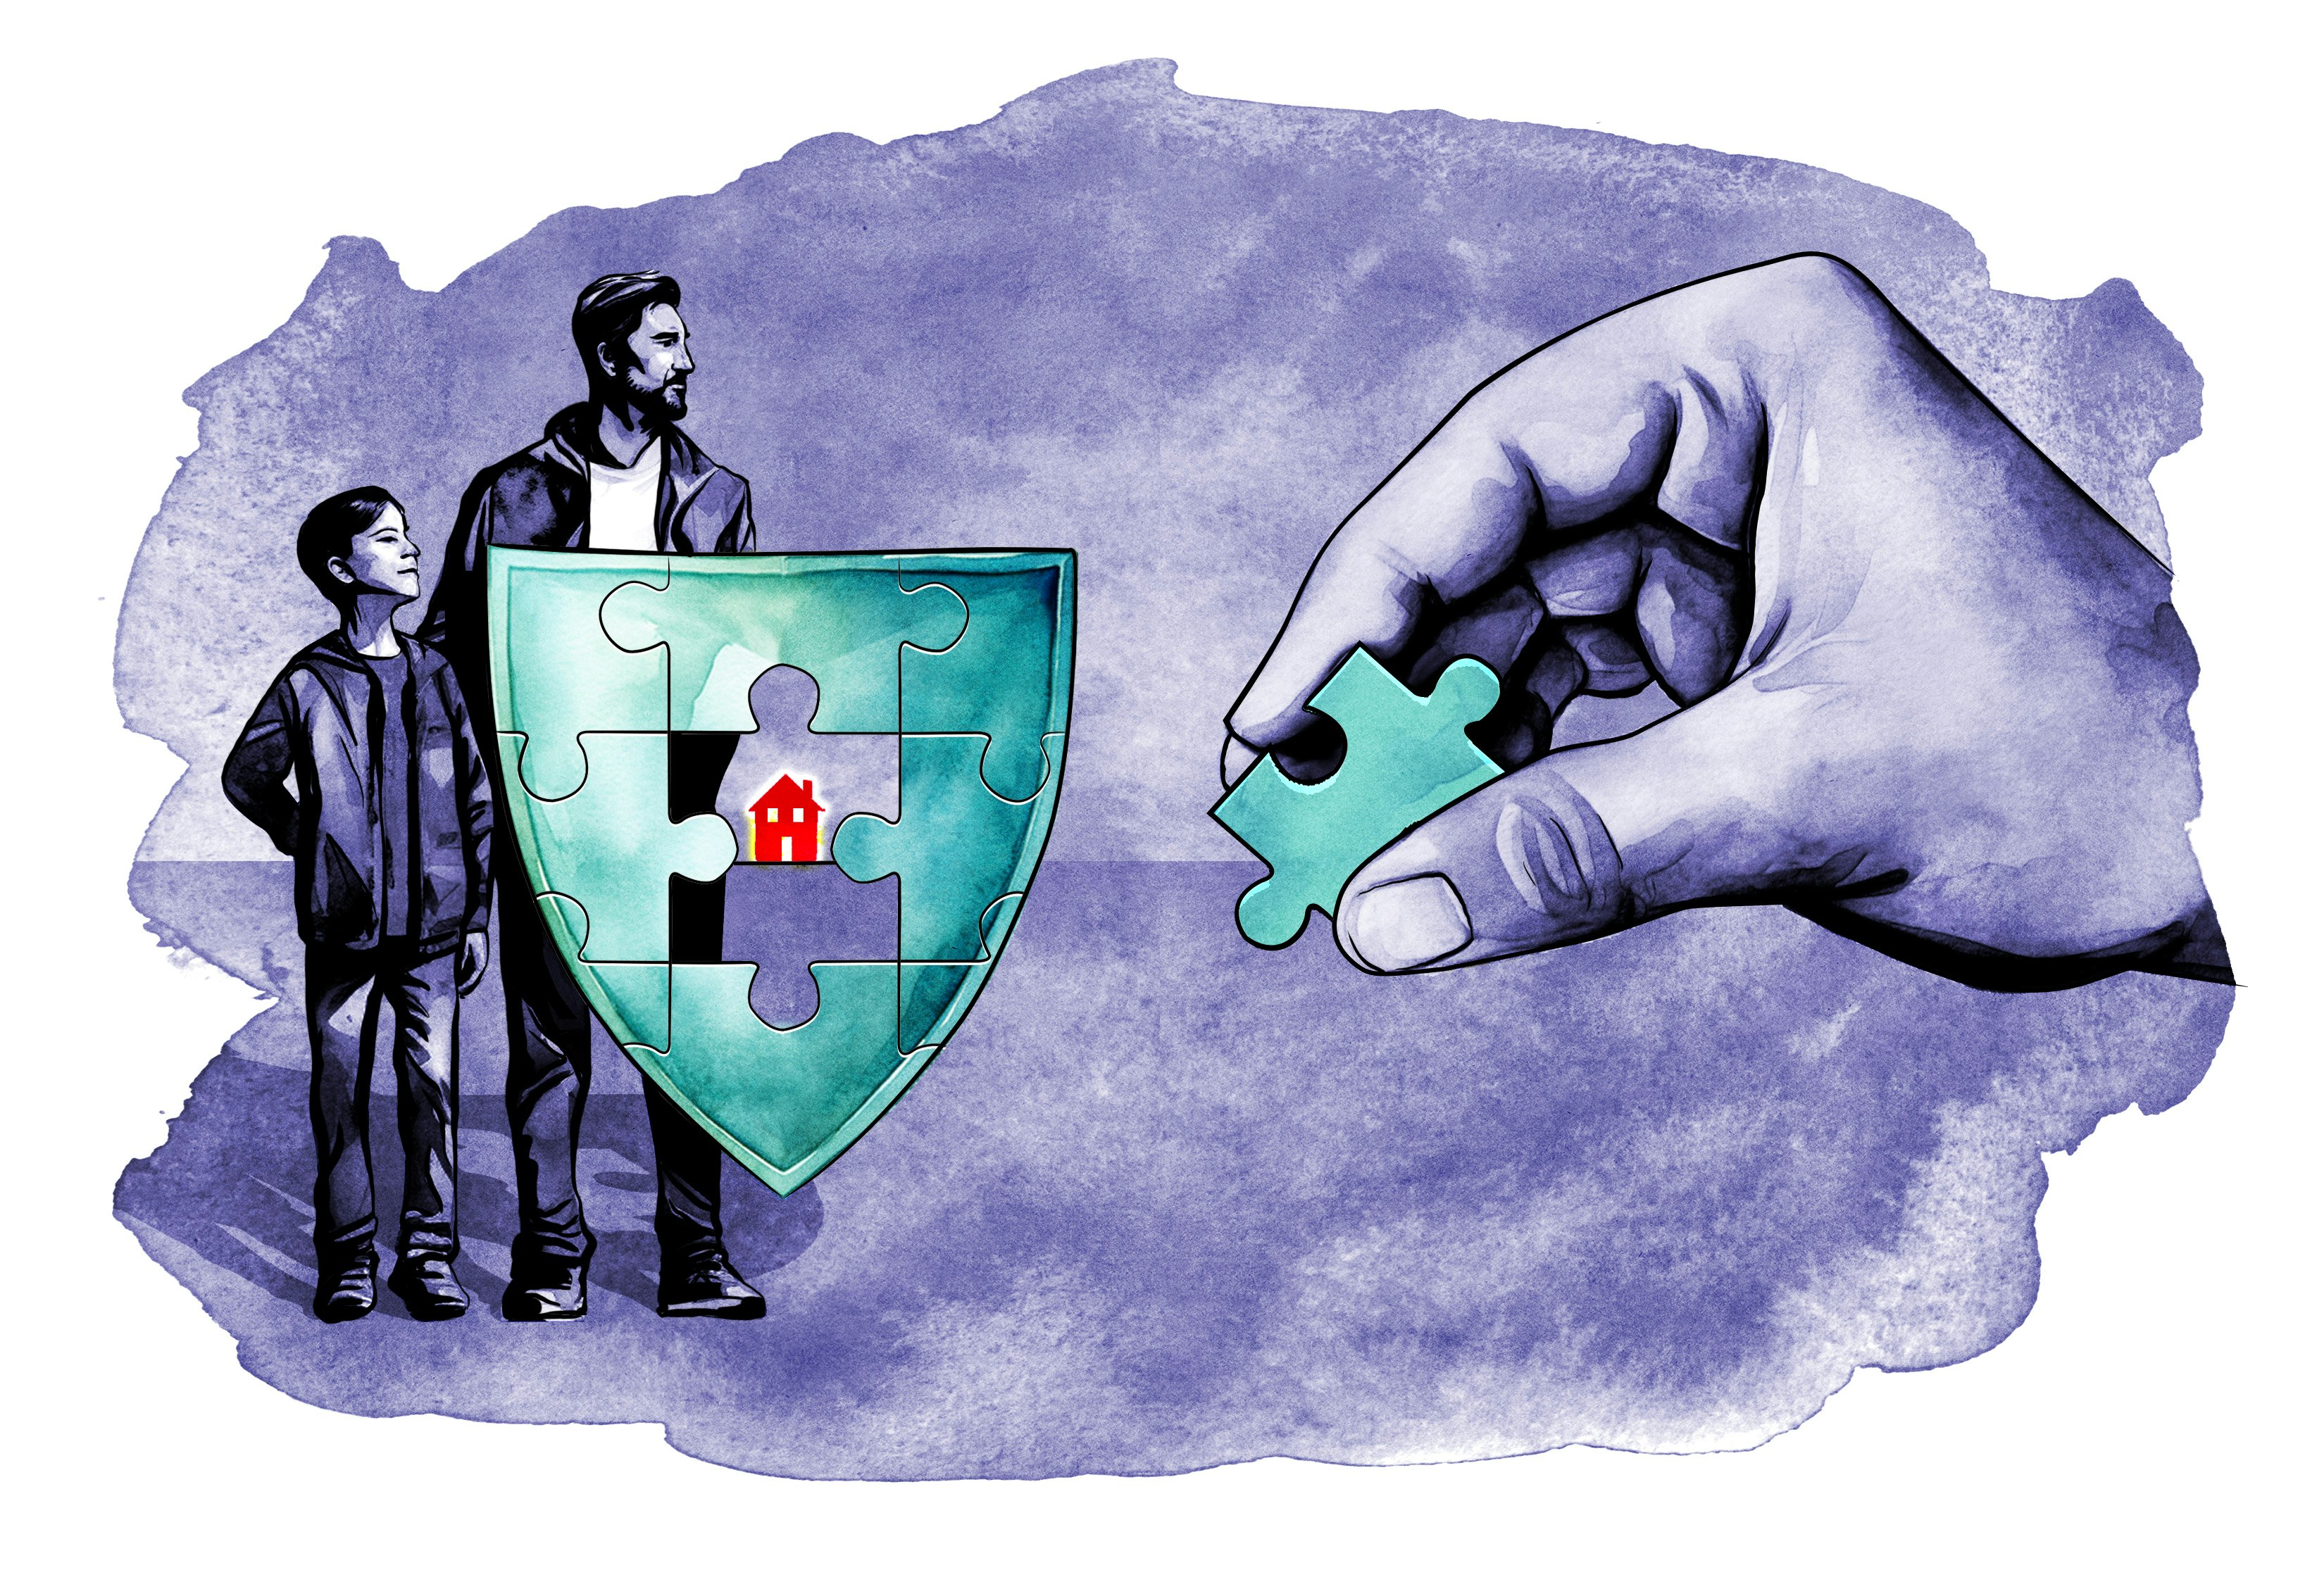 Illustration of a father and son standing behind a shield, with a hand adding a missing piece to the shield